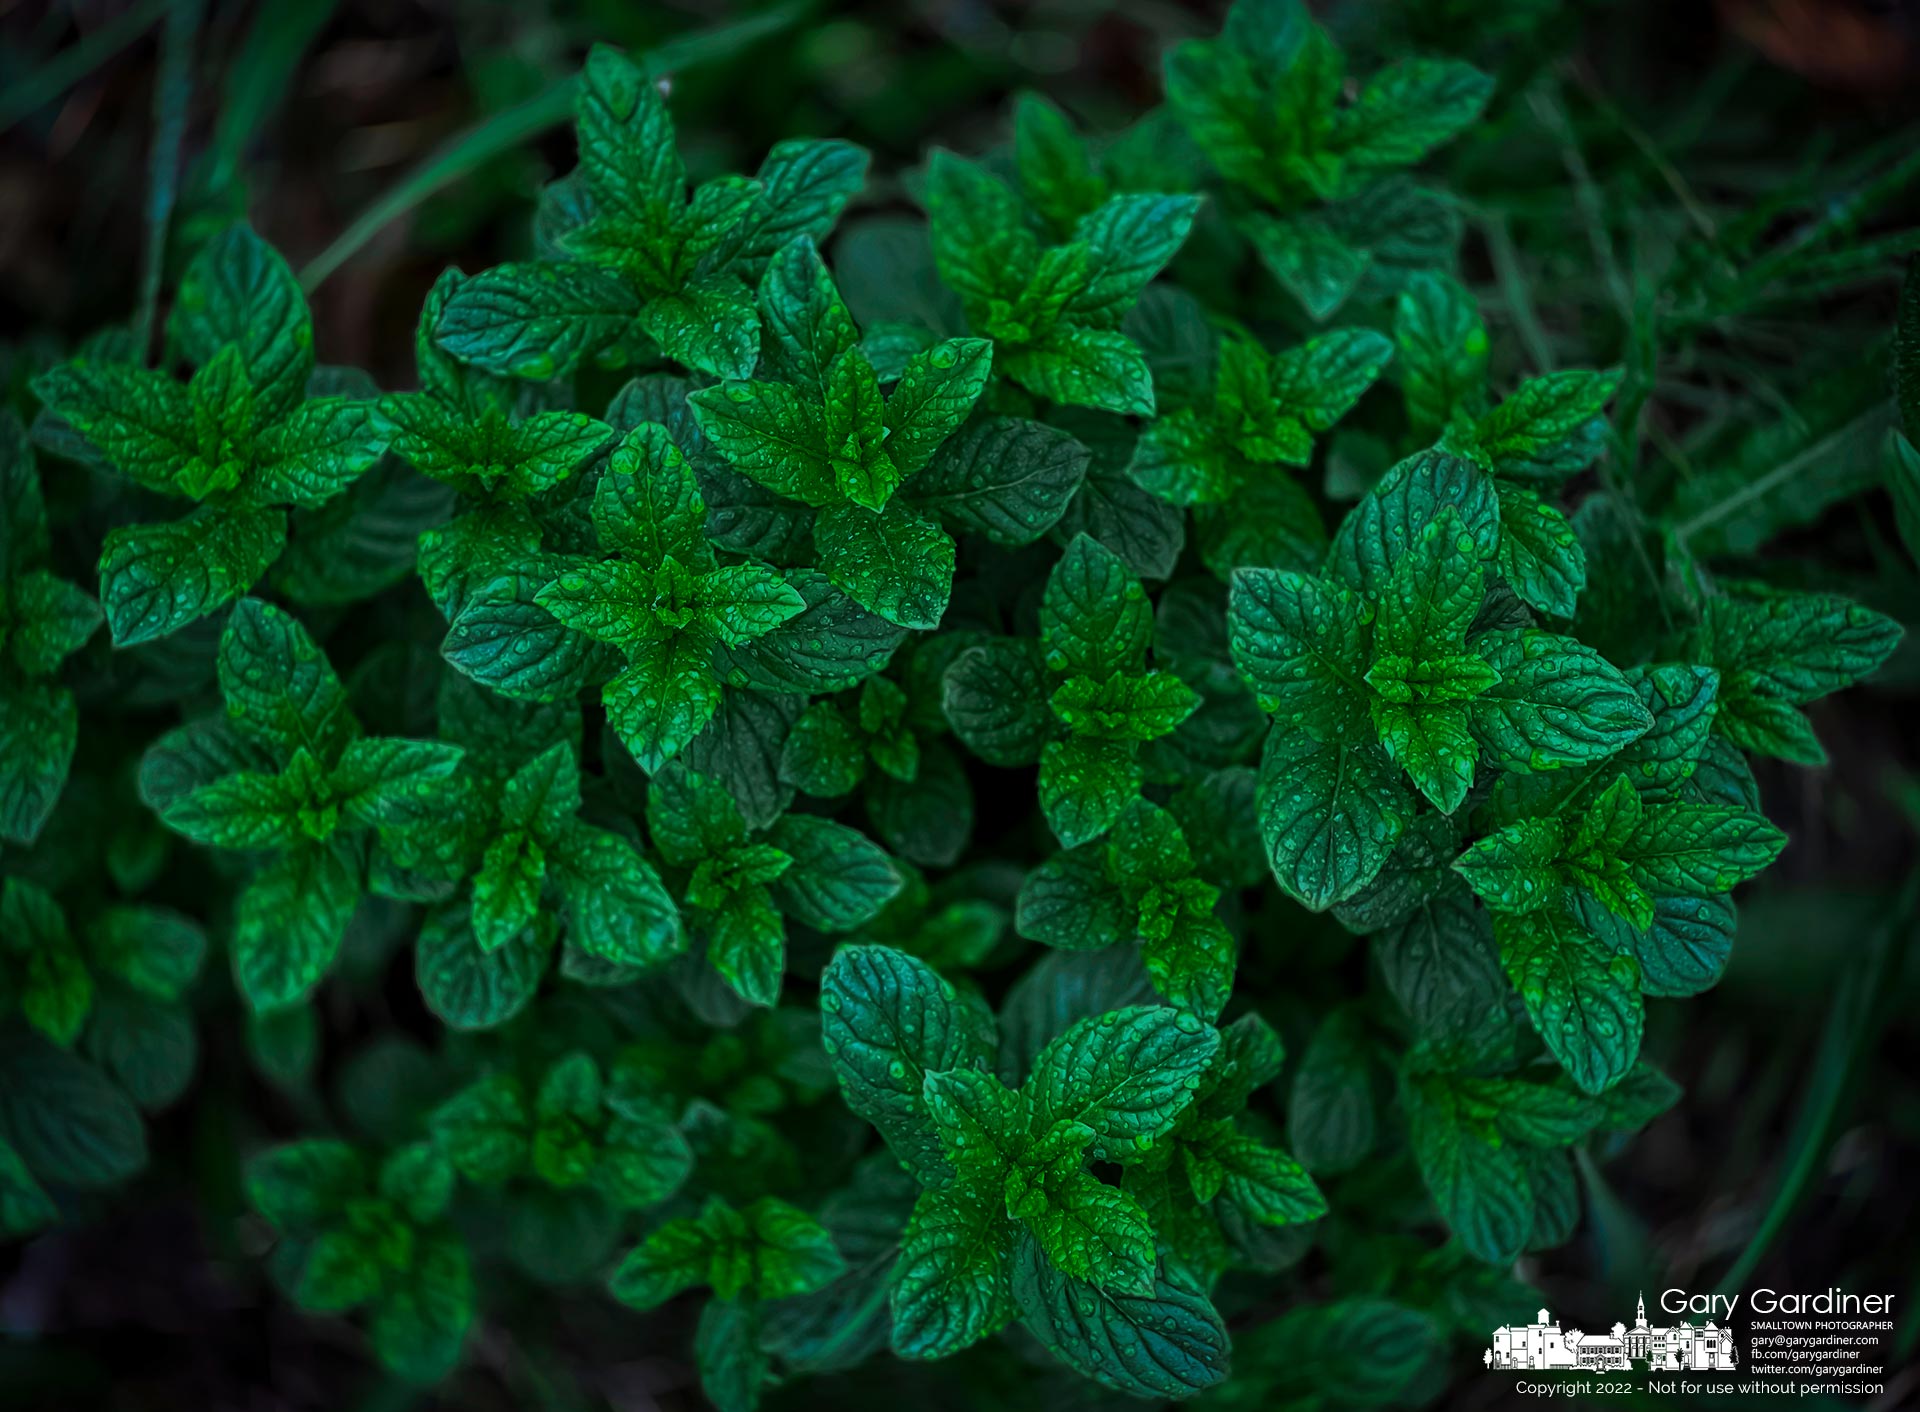 The first growth of wild spearmint sprouts along the edge of Cleveland Avenue near the old barn at the Braun Farm. My Final Photo for April 18, 2022.